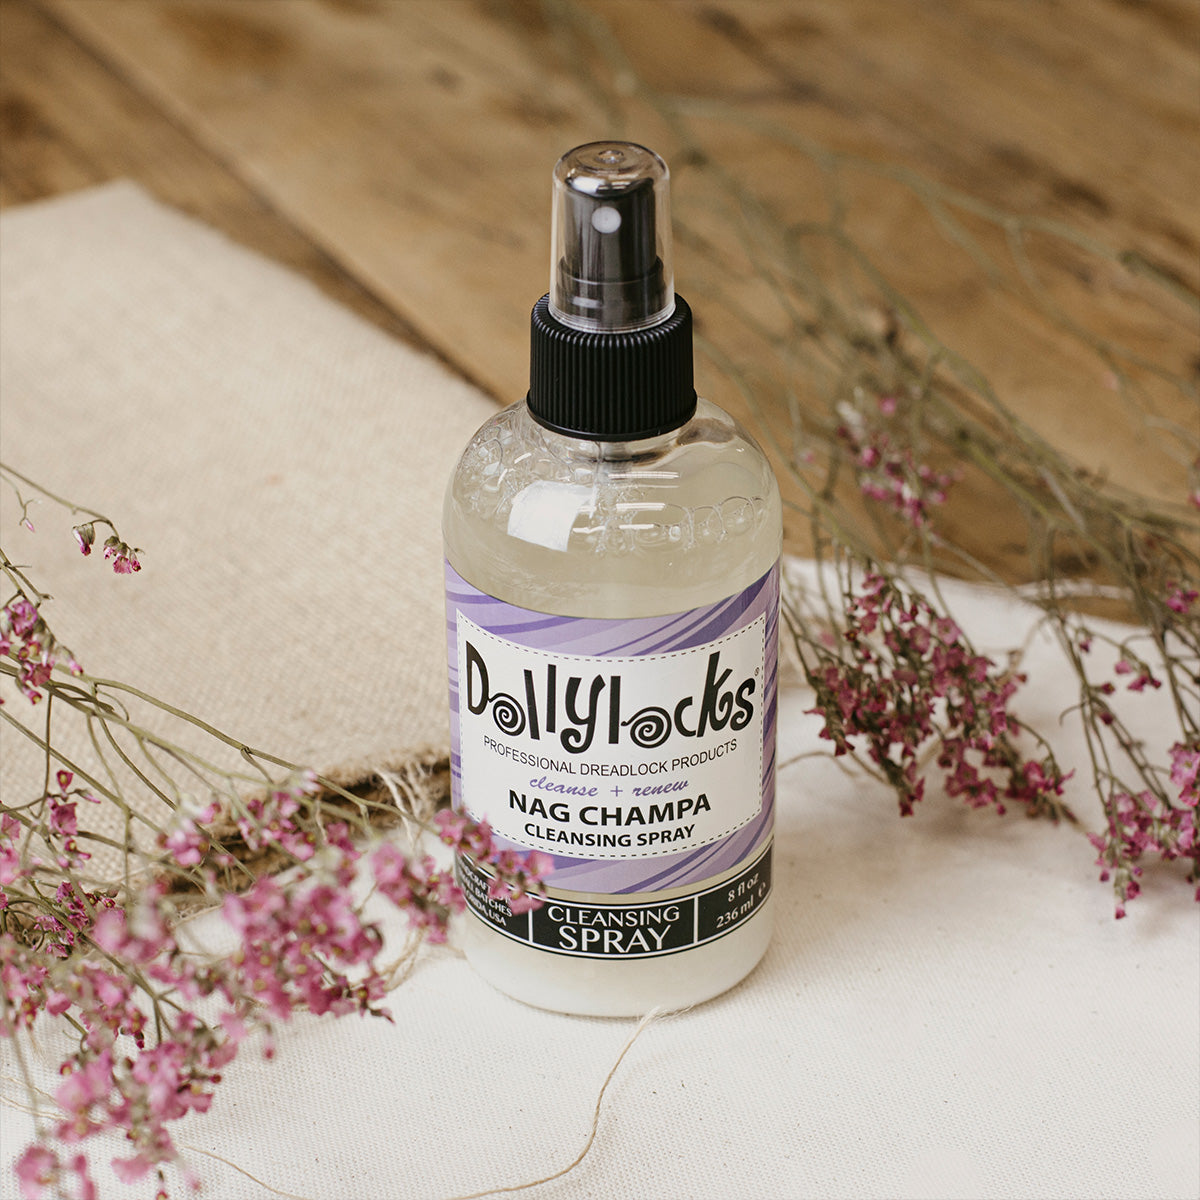 Cleansing spray lavender sky from Dollylocks, dread care